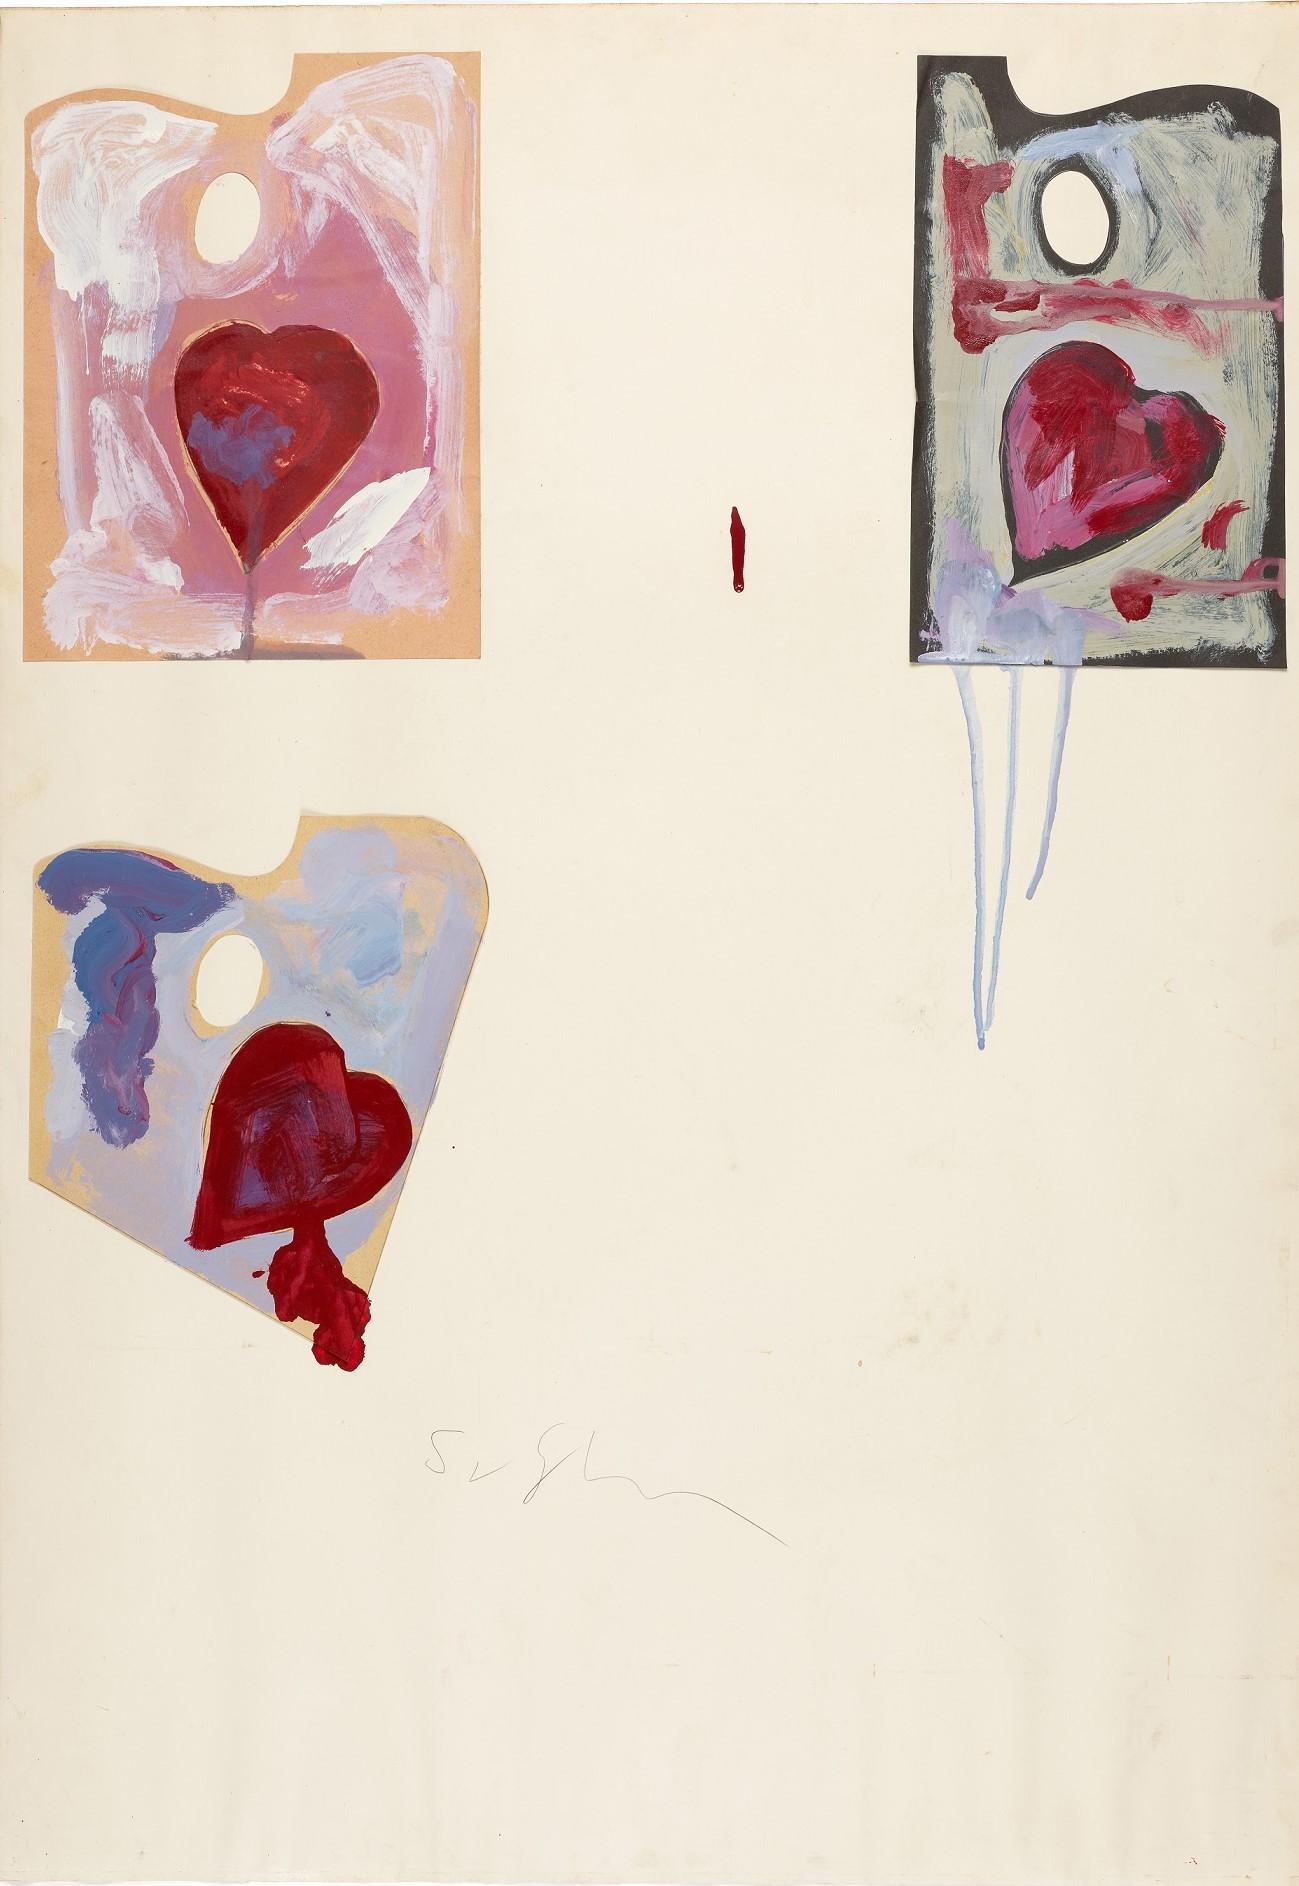 Mario Schifano Abstract Painting - "Hearts and Palettes" Enamel and collage cm. 69 x 98 1970 ca